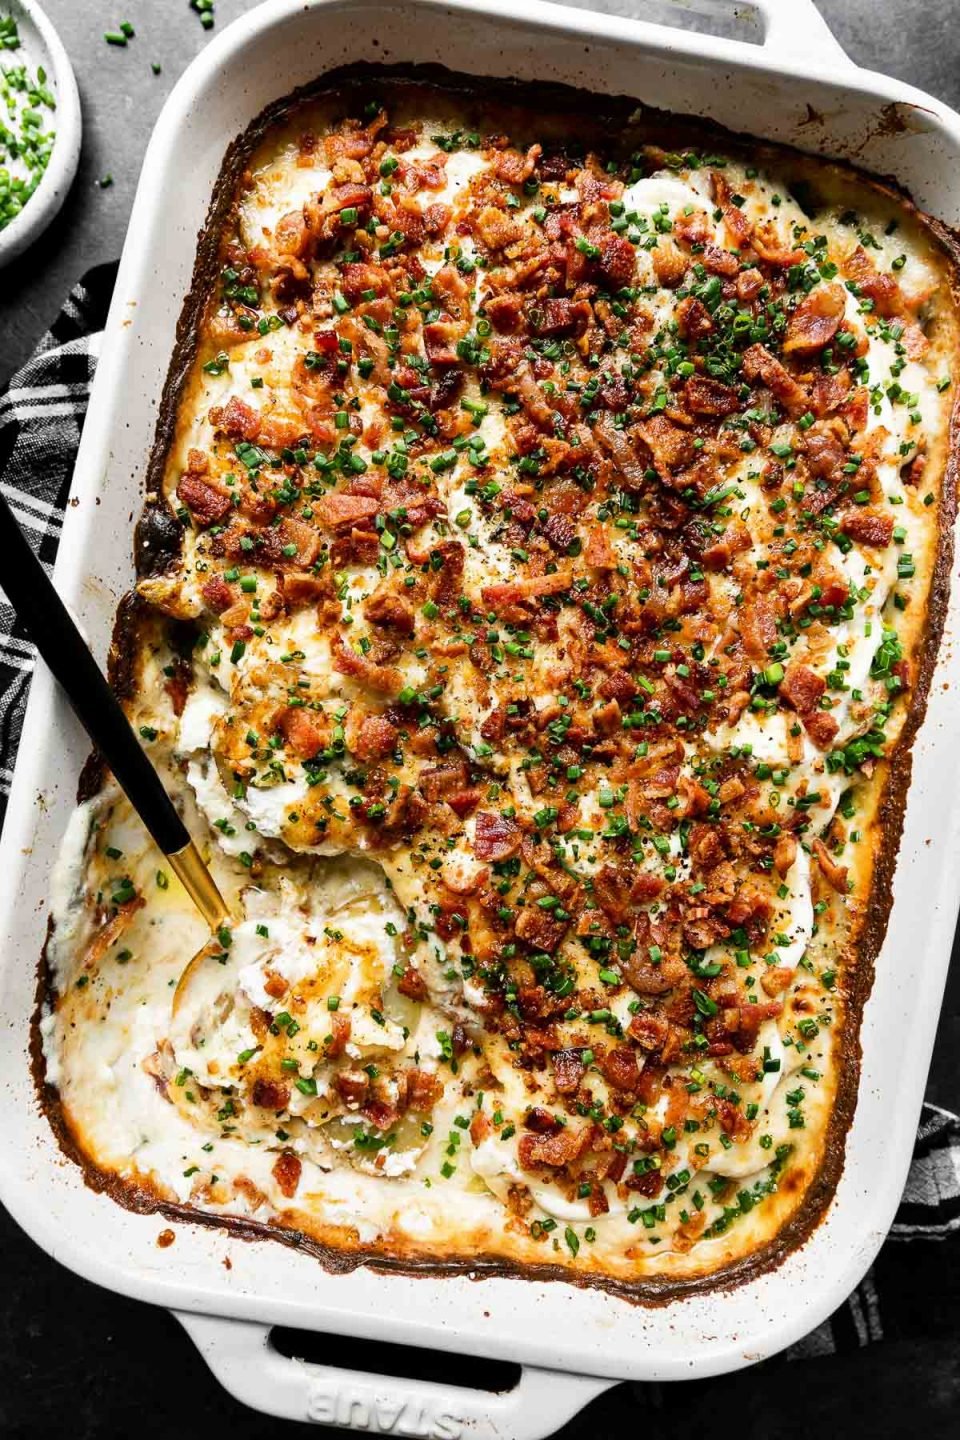 A side angle shot of Mom's Loaded Au Gratin Potatoes in a white Staub baking dish sit atop a dark textured surface. A black and white plaid linen napkin rest underneath the baking dish. A black and gold serving spoon rests inside of the baking dish and a portion of the dish has been served. A small ceramic dish filled with freshly snipped chives rests alongside the baking dish.